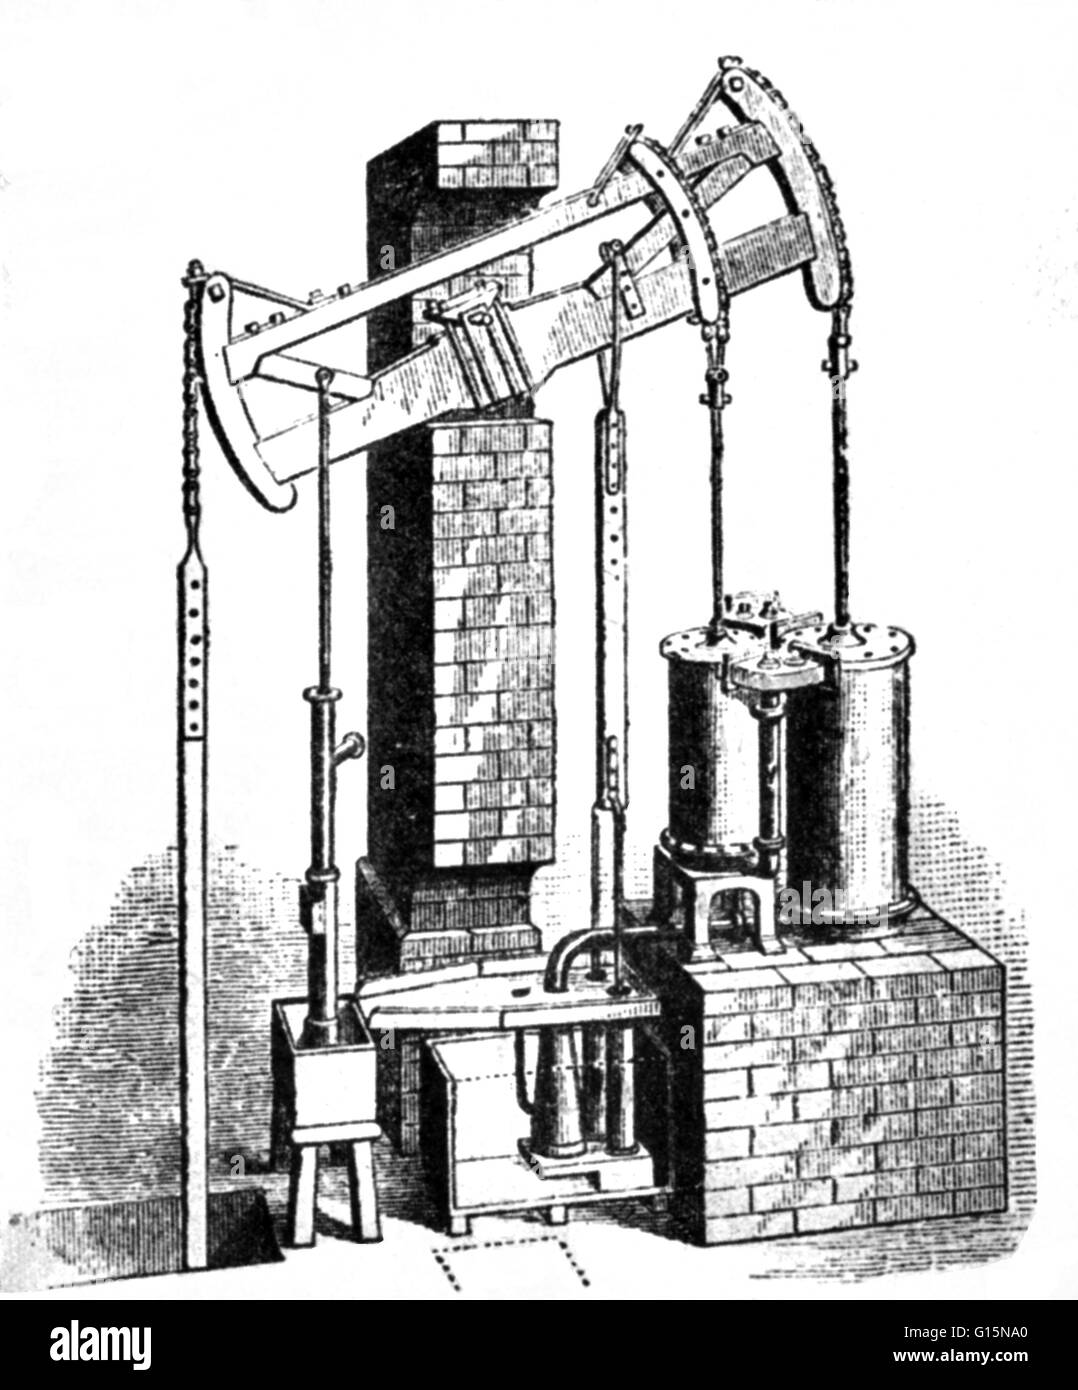 Jonathan Hornblower (July 5, 1753 - February 23, 1815) was a British pioneer of steam power. He patented a double-cylinder compound reciprocating beam engine in 1781. He was prevented from developing it further by James Watt, who claimed his own patents w Stock Photo